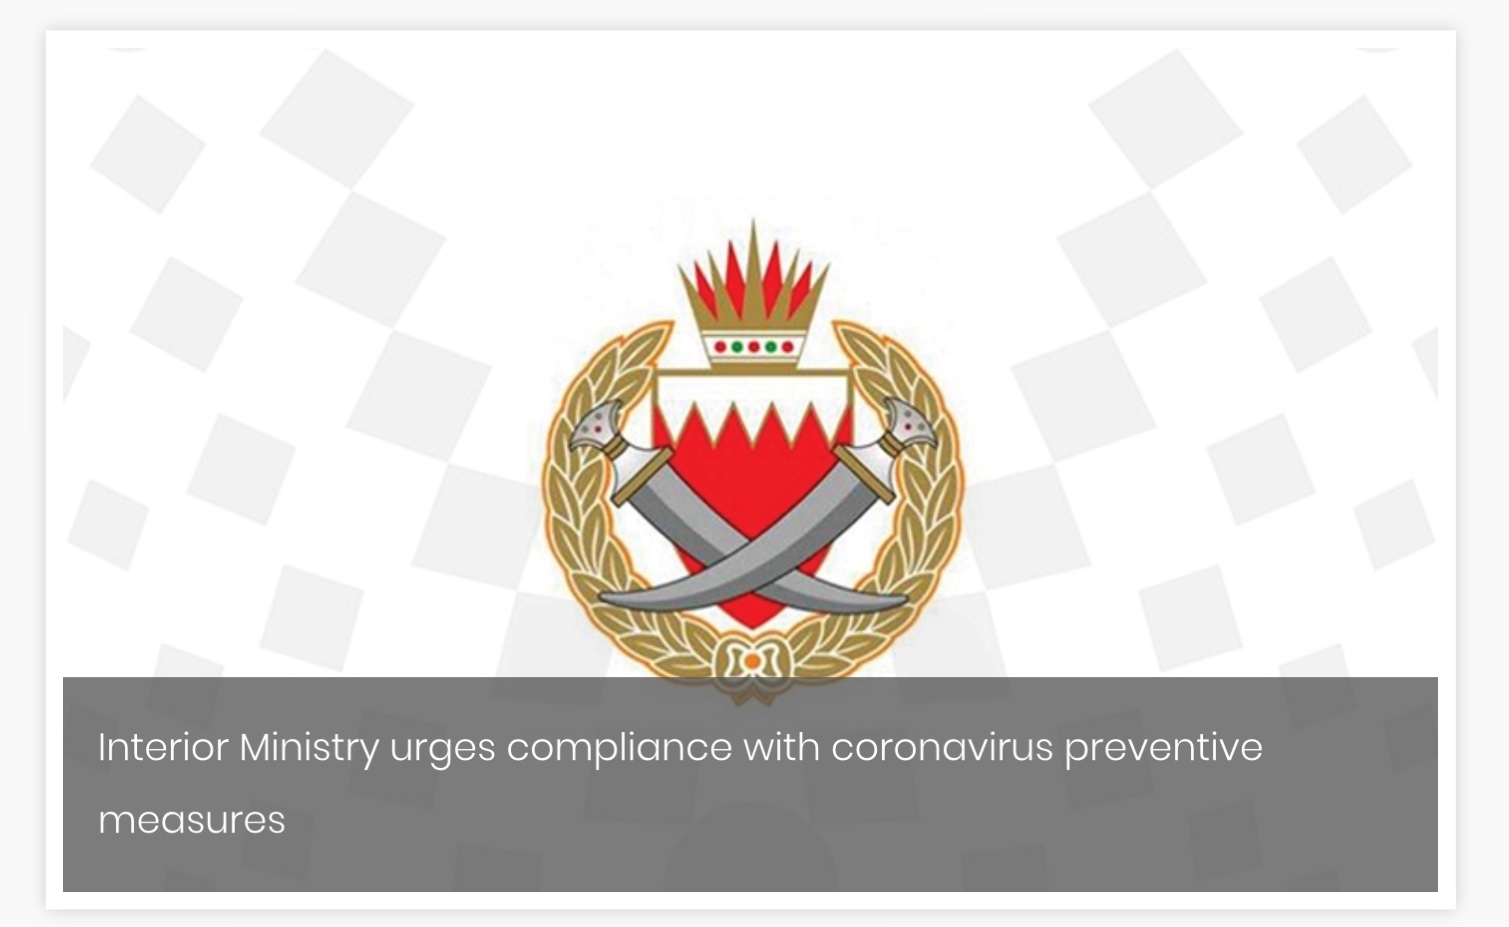 Interior Ministry urges compliance with coronavirus preventive measures